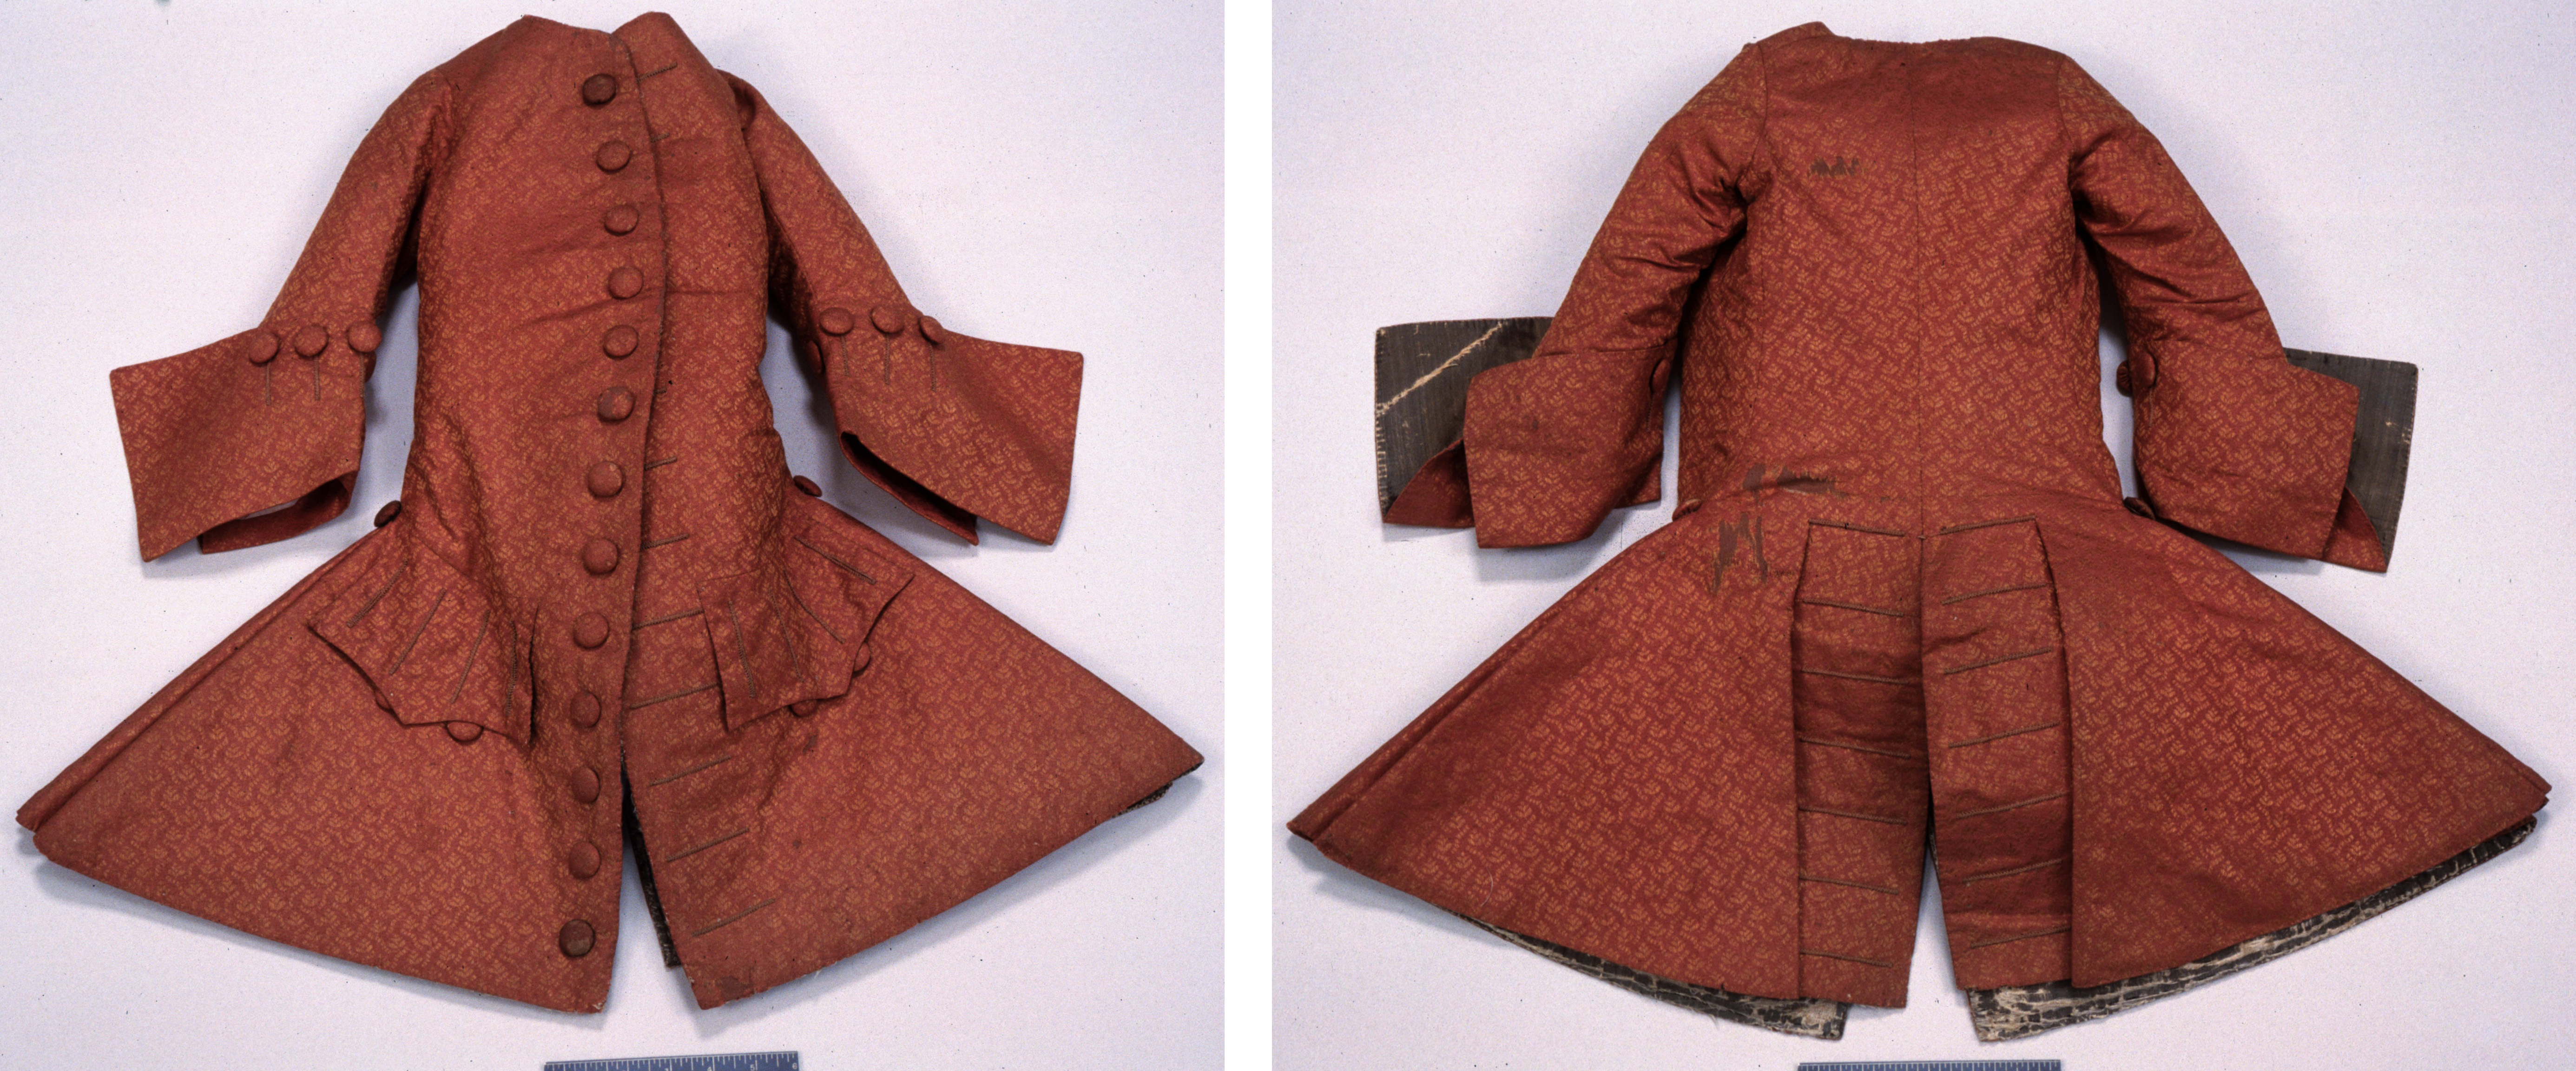 (After conservation—Left: front; Right: back) Boy’s Coat, Italy, 1720–30, Los Angeles County Museum of Art, gift of Sanford and Mary Jane Bloom, photos by Catherine McLean